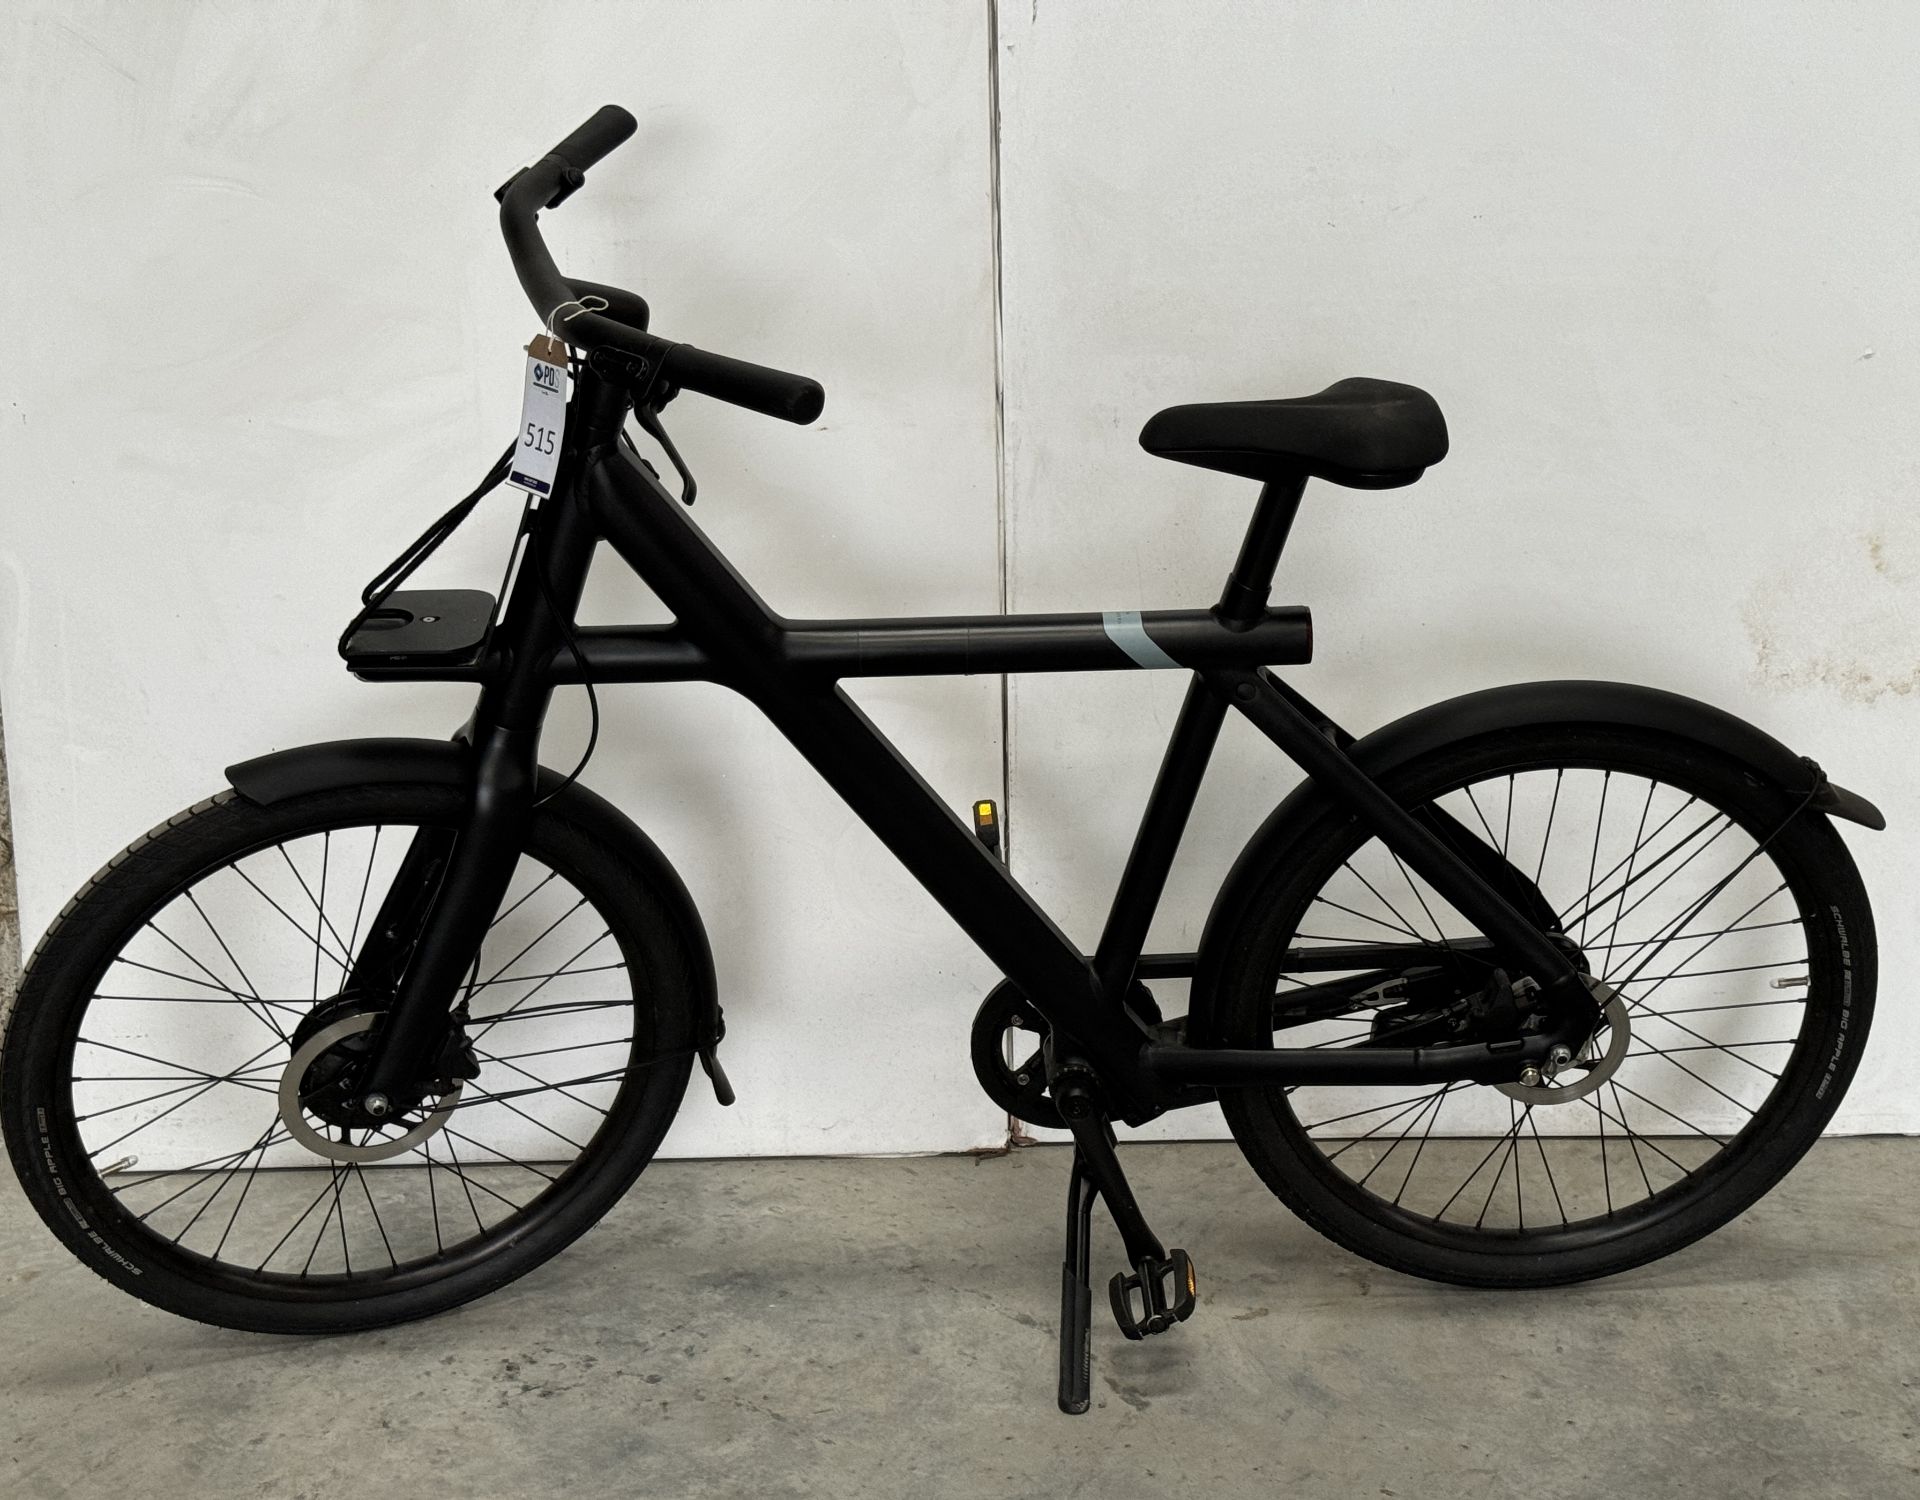 VanMoof X3 Electric Bike, Frame Number ASY4100141 (NOT ROADWORTHY - FOR SPARES ONLY) (No codes